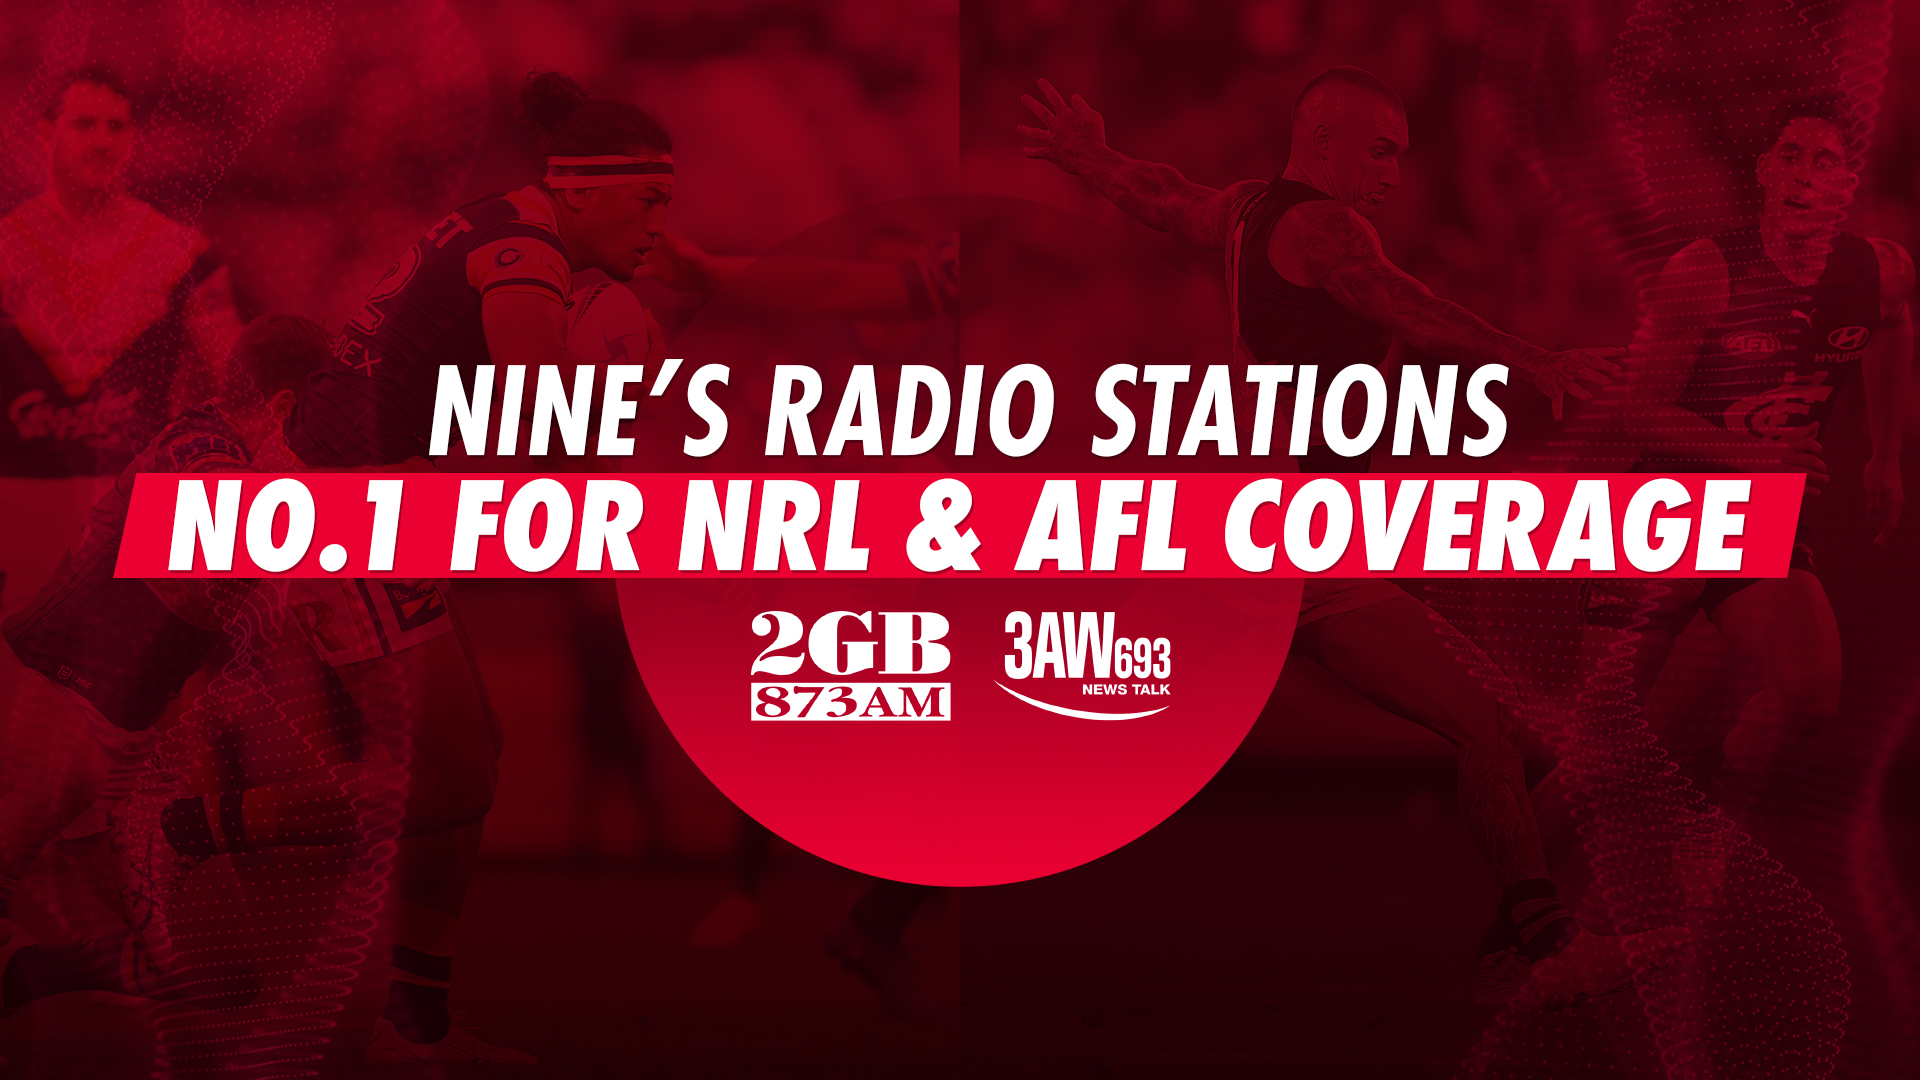 Nines radio stations No.1 for NRL and AFL coverage